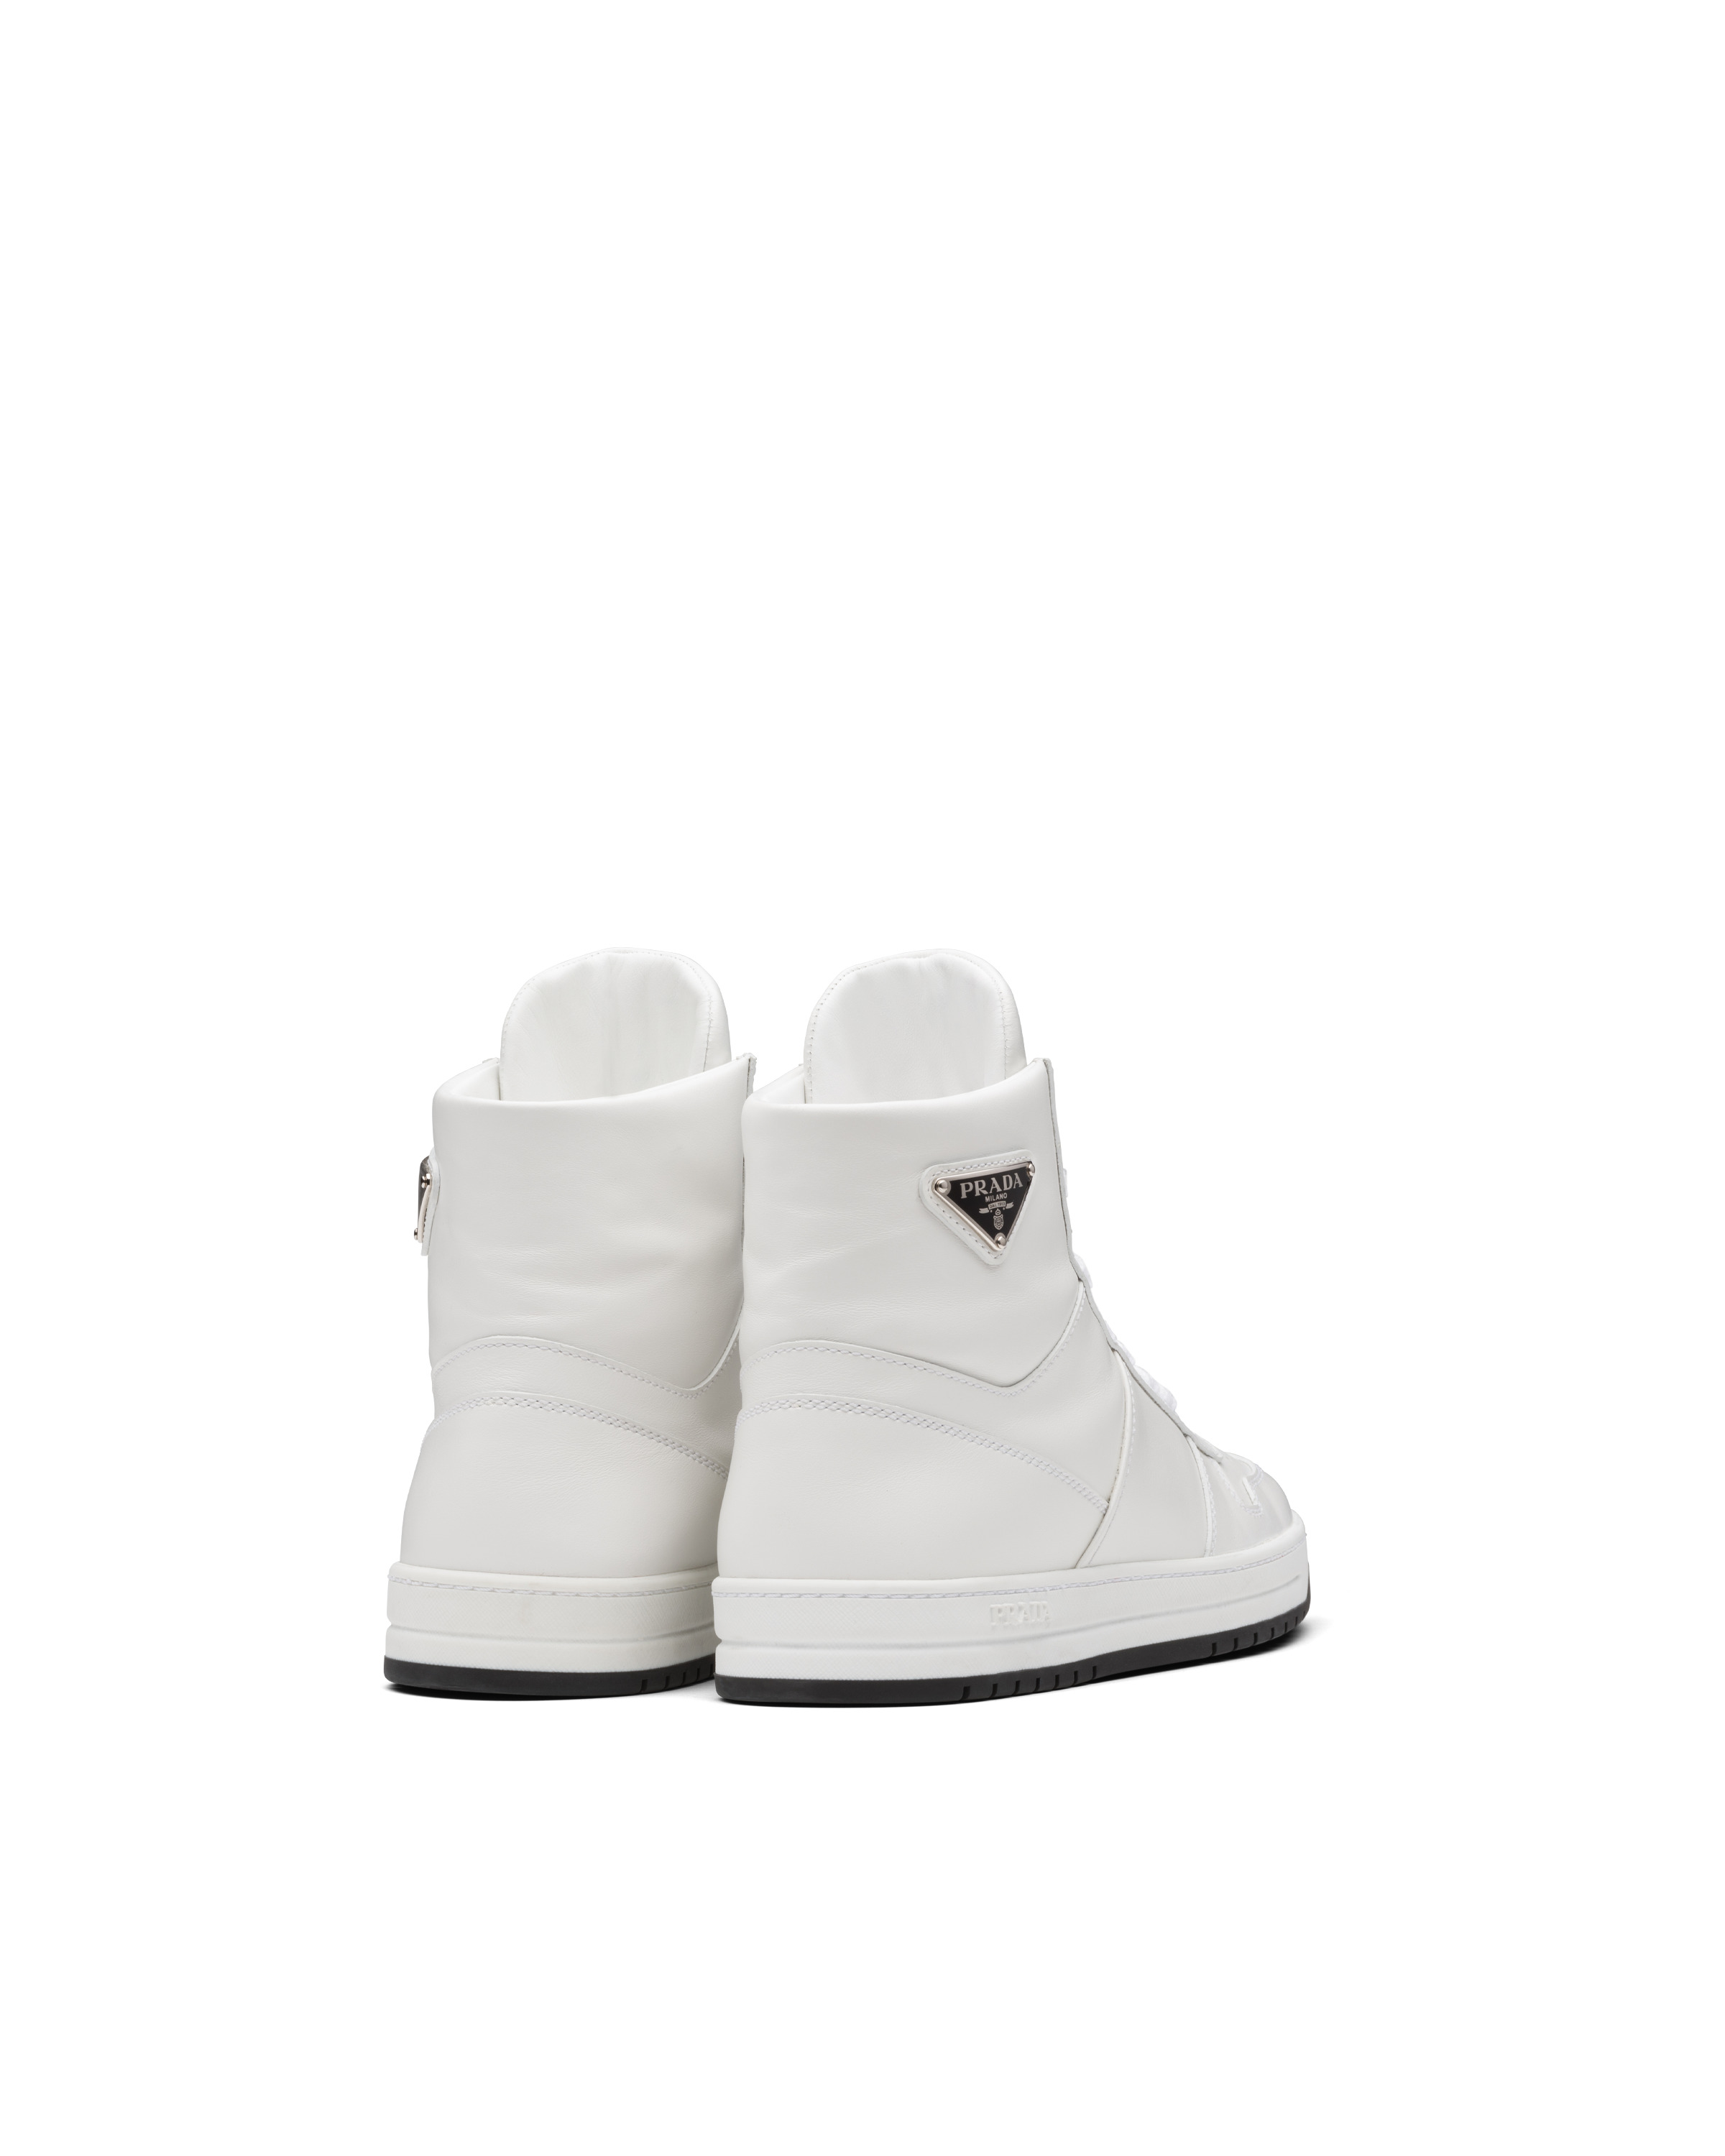 Downtown perforated leather high-top sneakers - 4